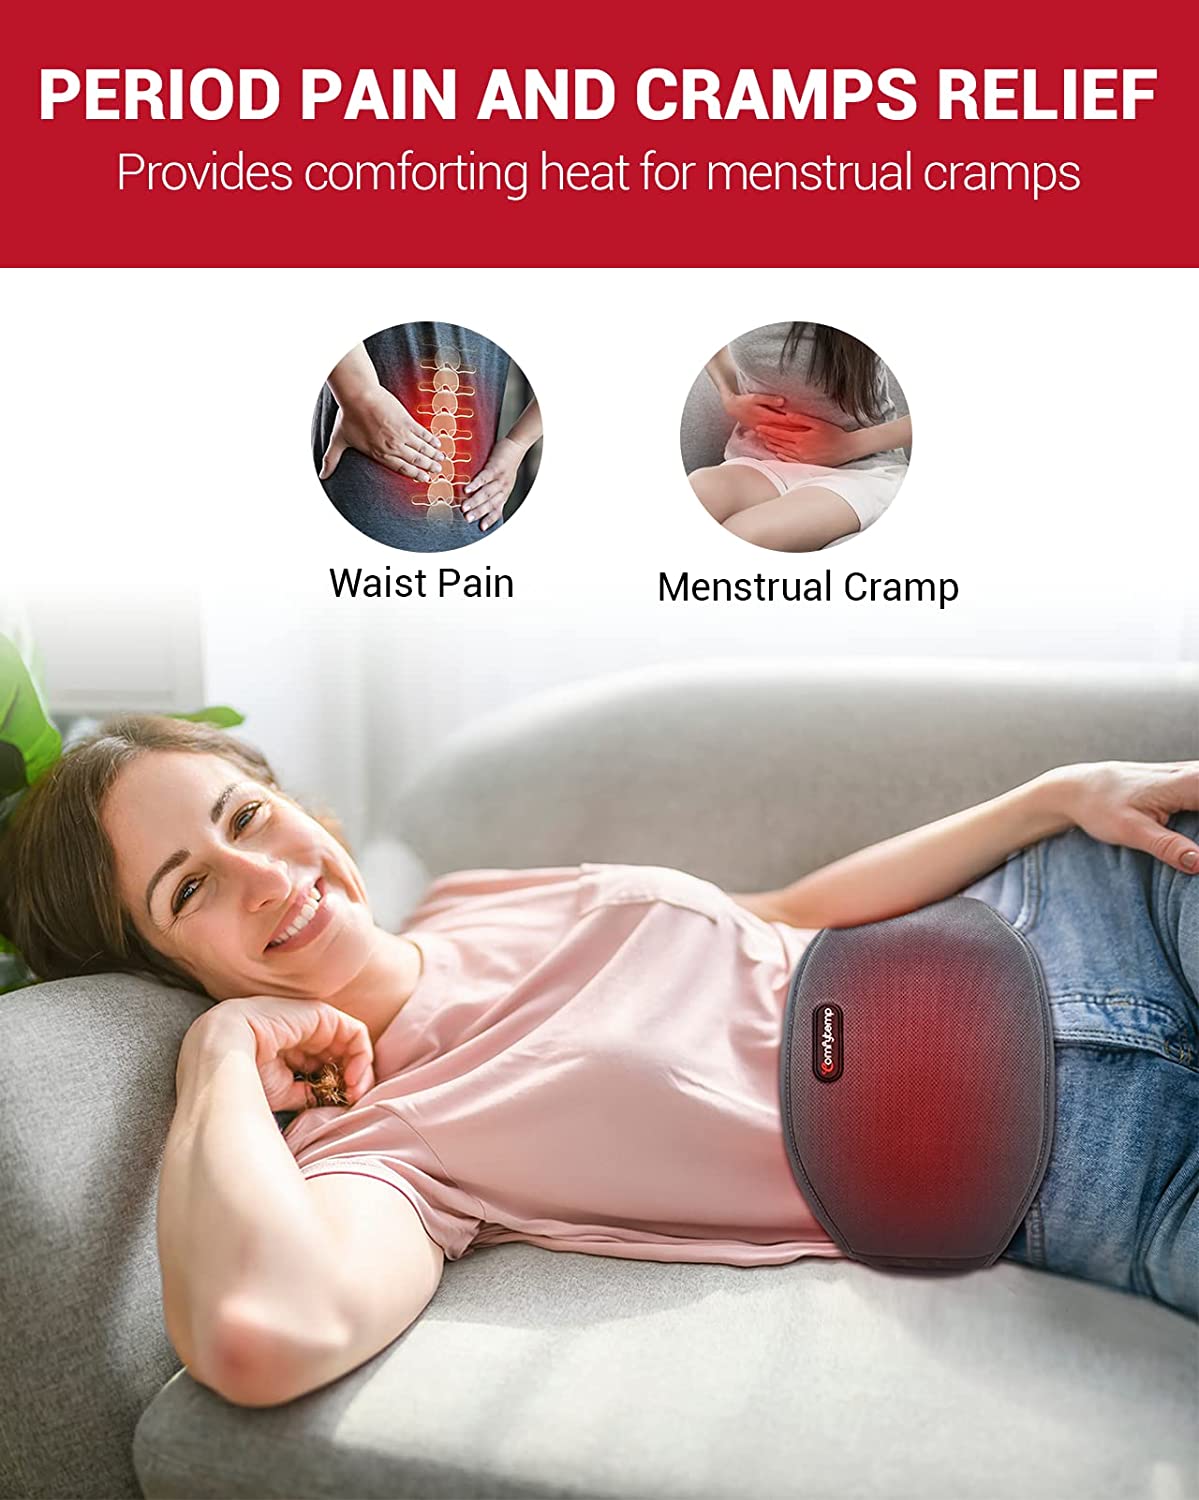 Heated Back Brace for Lower Back Pain Women, Cordless Heating Pad  Rechargeable 5V 10000Mah Back Massager with Heat for Lower Back Therapy  Pain Relief